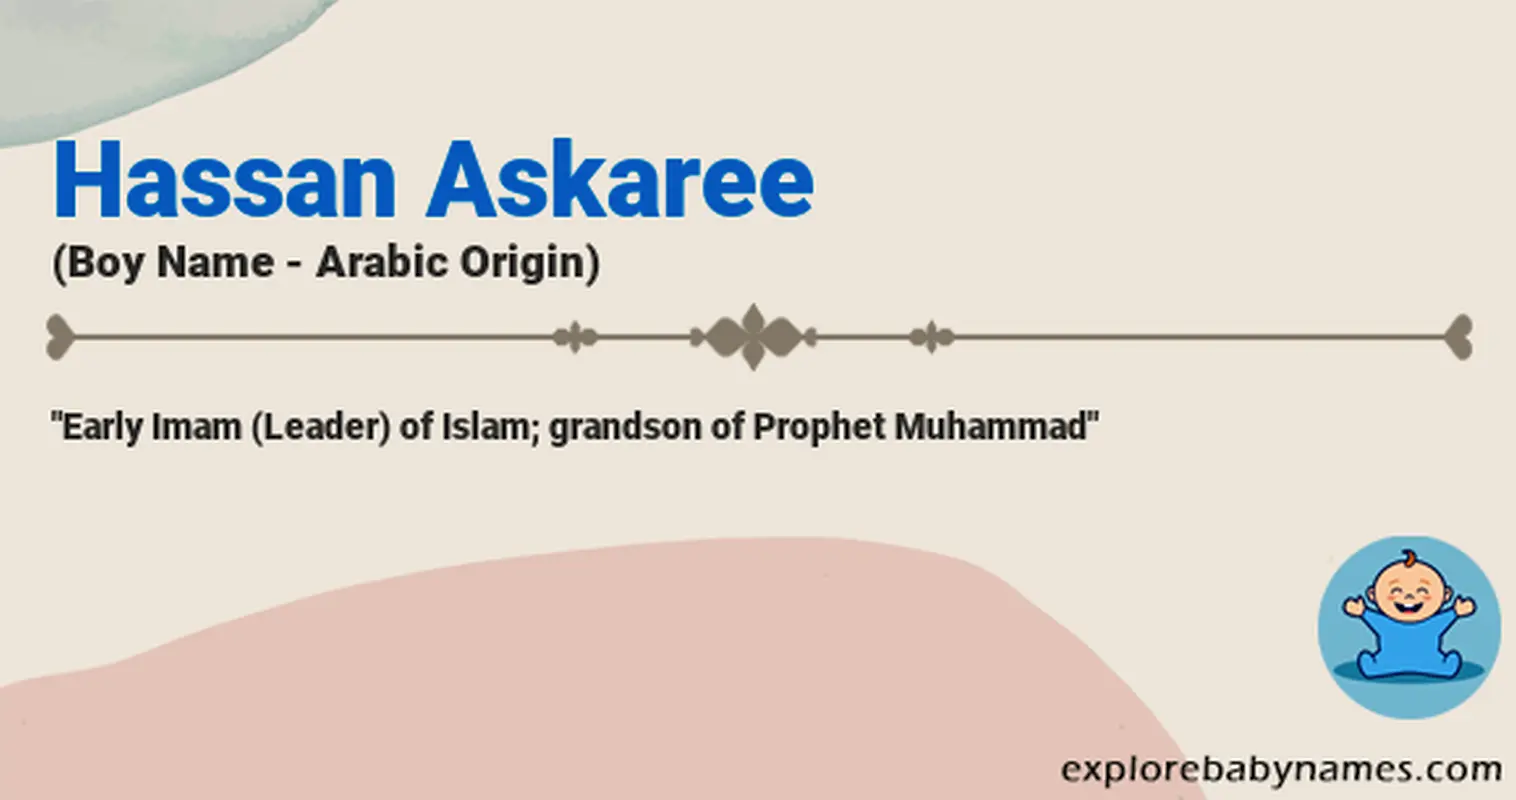 Meaning of Hassan Askaree